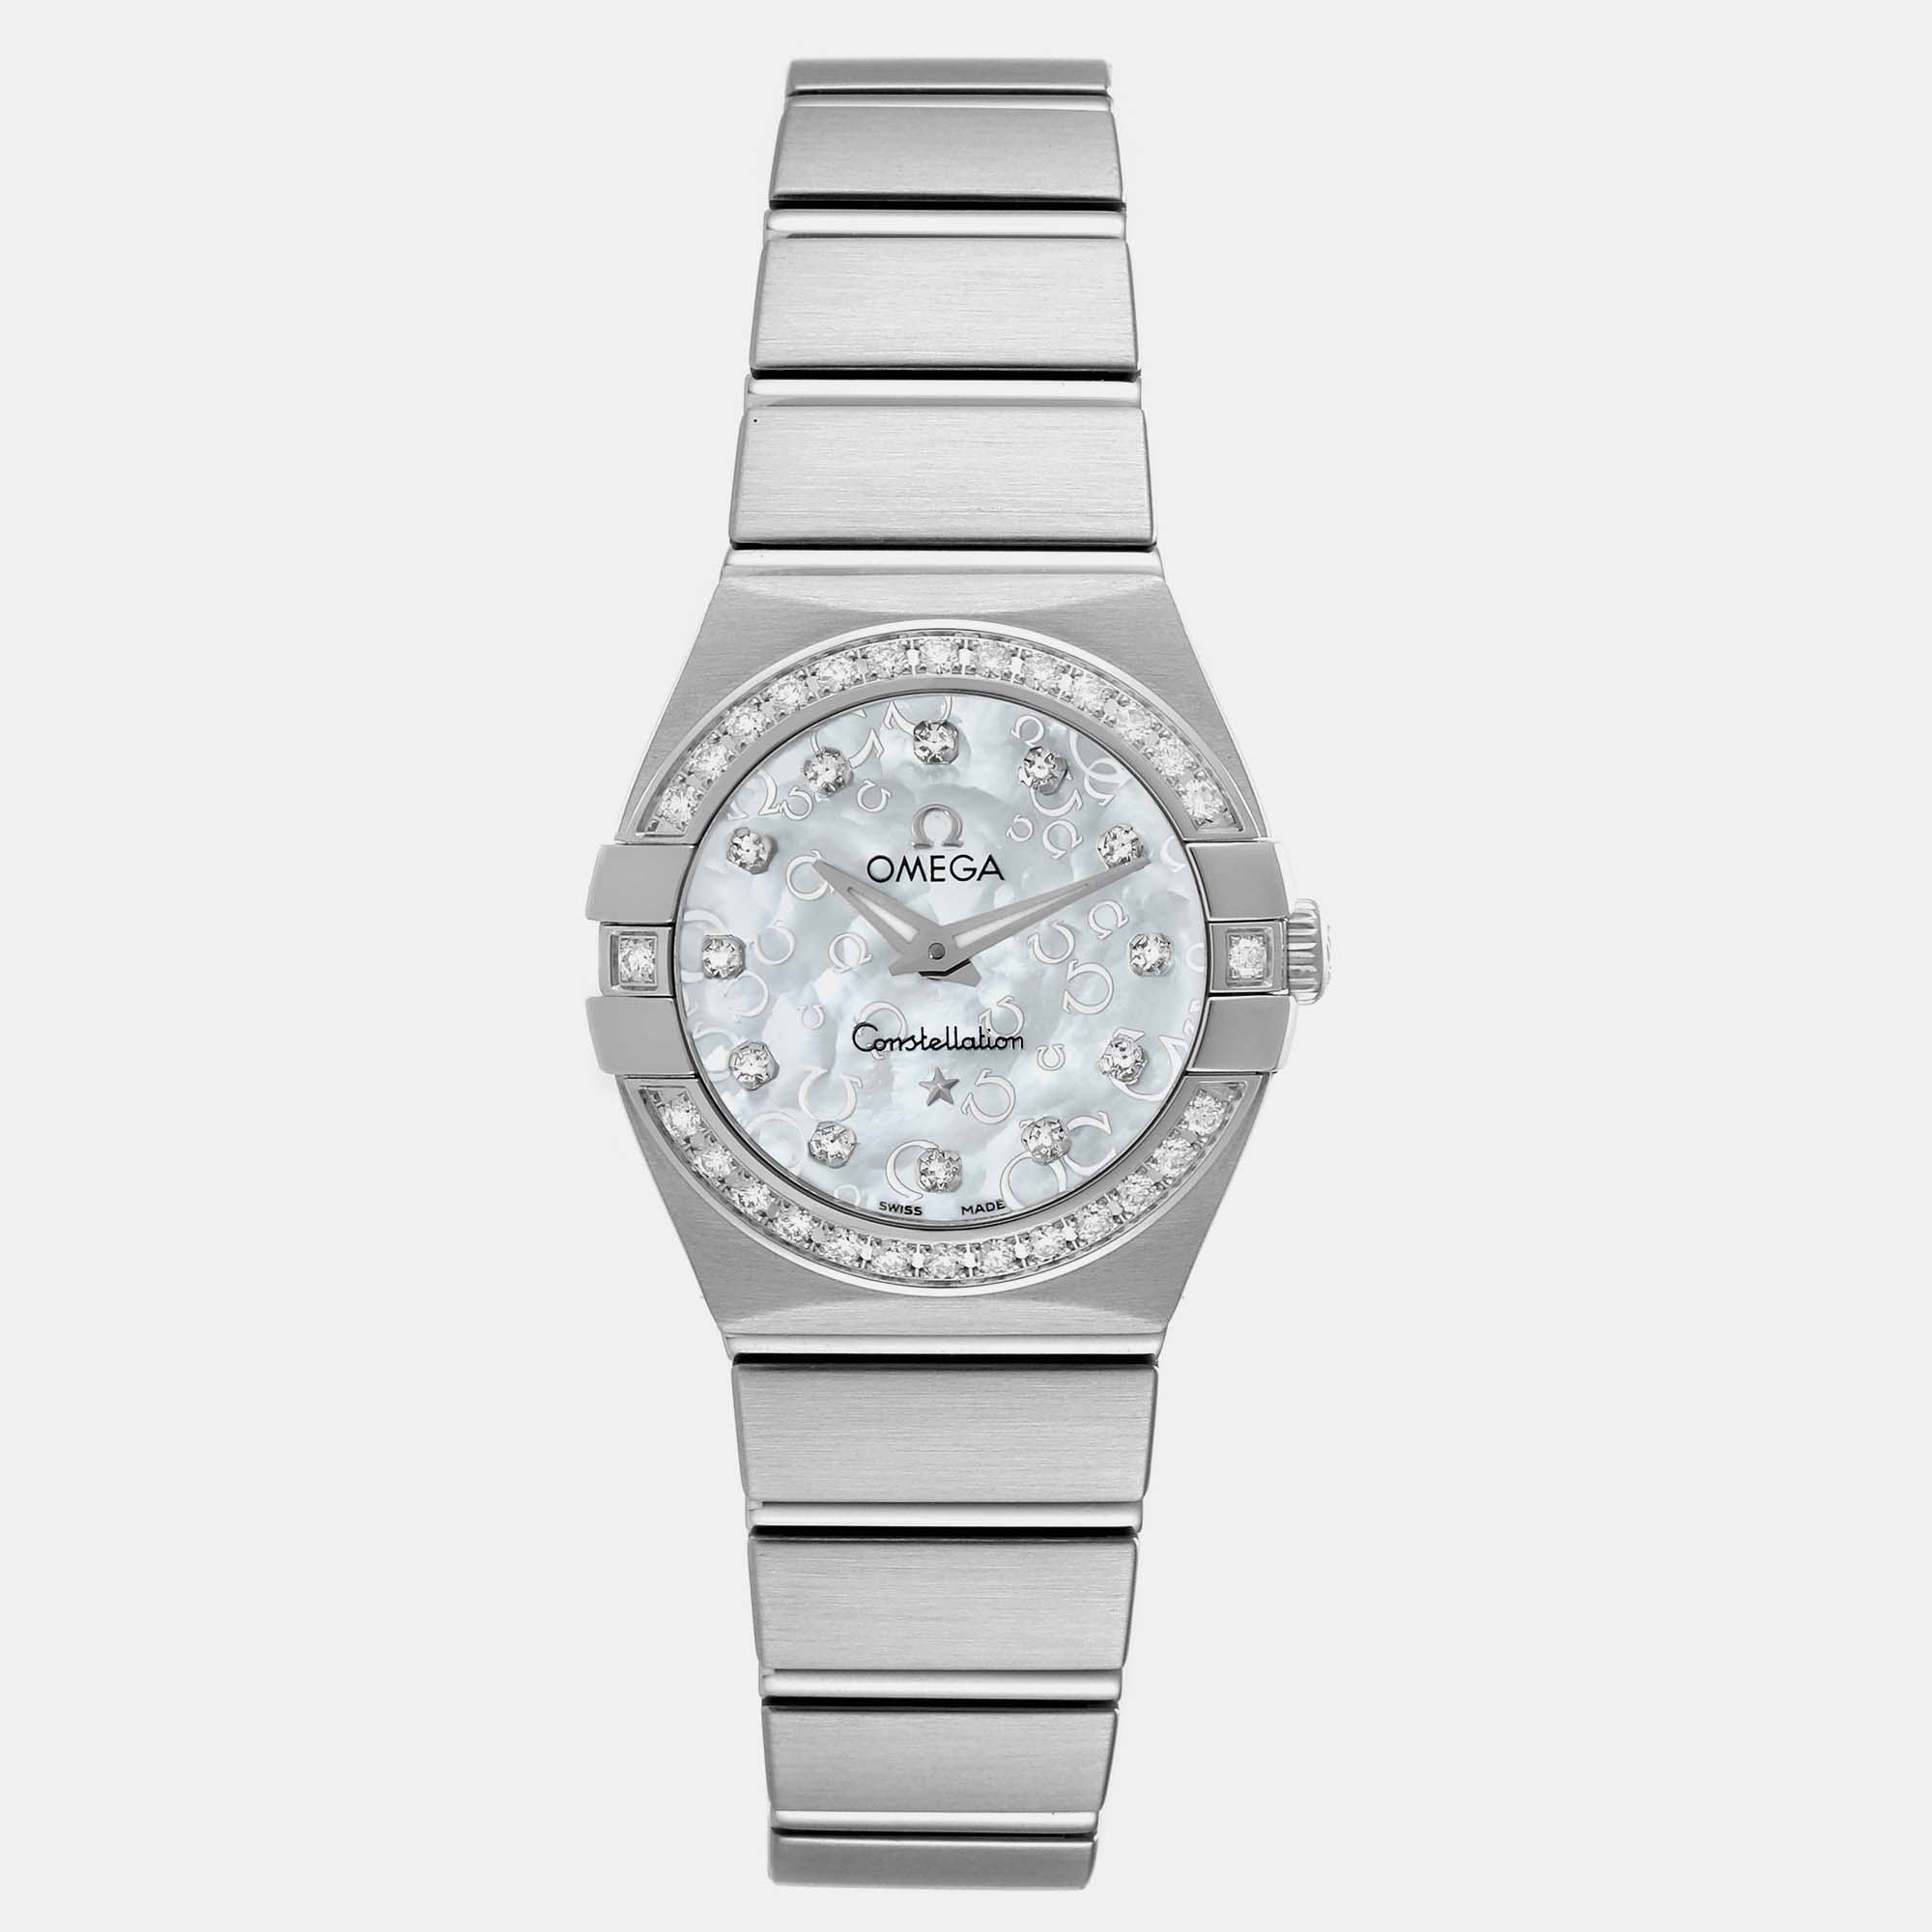 Pre-owned Omega Mother Of Pearl Diamond Stainless Steel Constellation 123.15.24.60.52.001 Quartz Women's Wristwatch In Silver